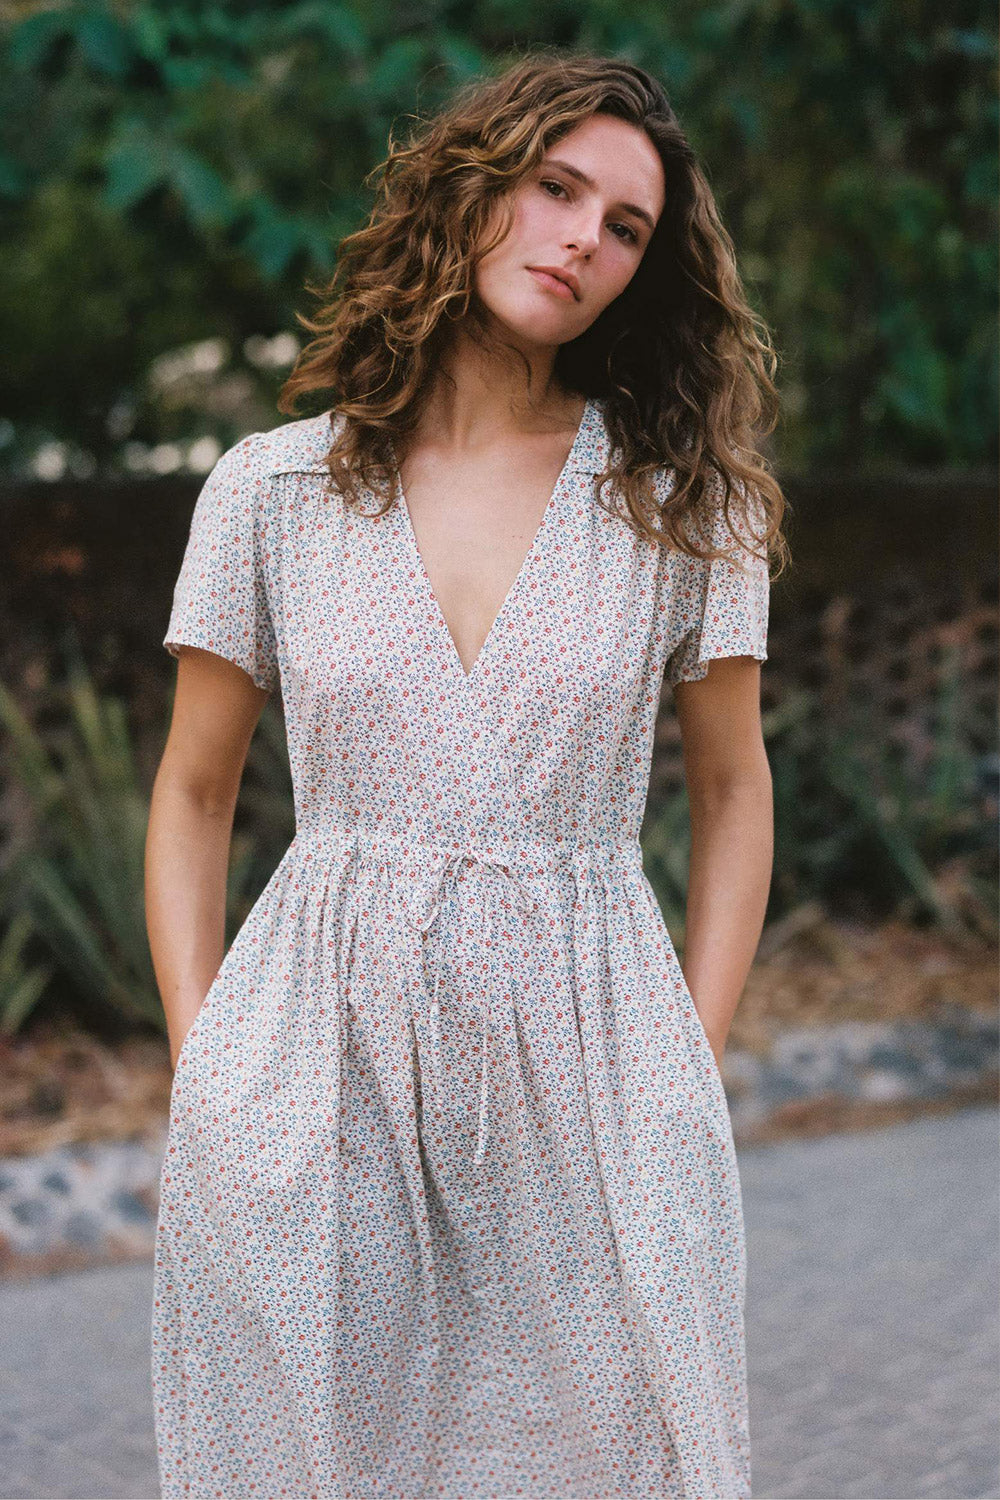 Christy Dawn - Regenerative, Ethical & Timeless Dresses & Accessories